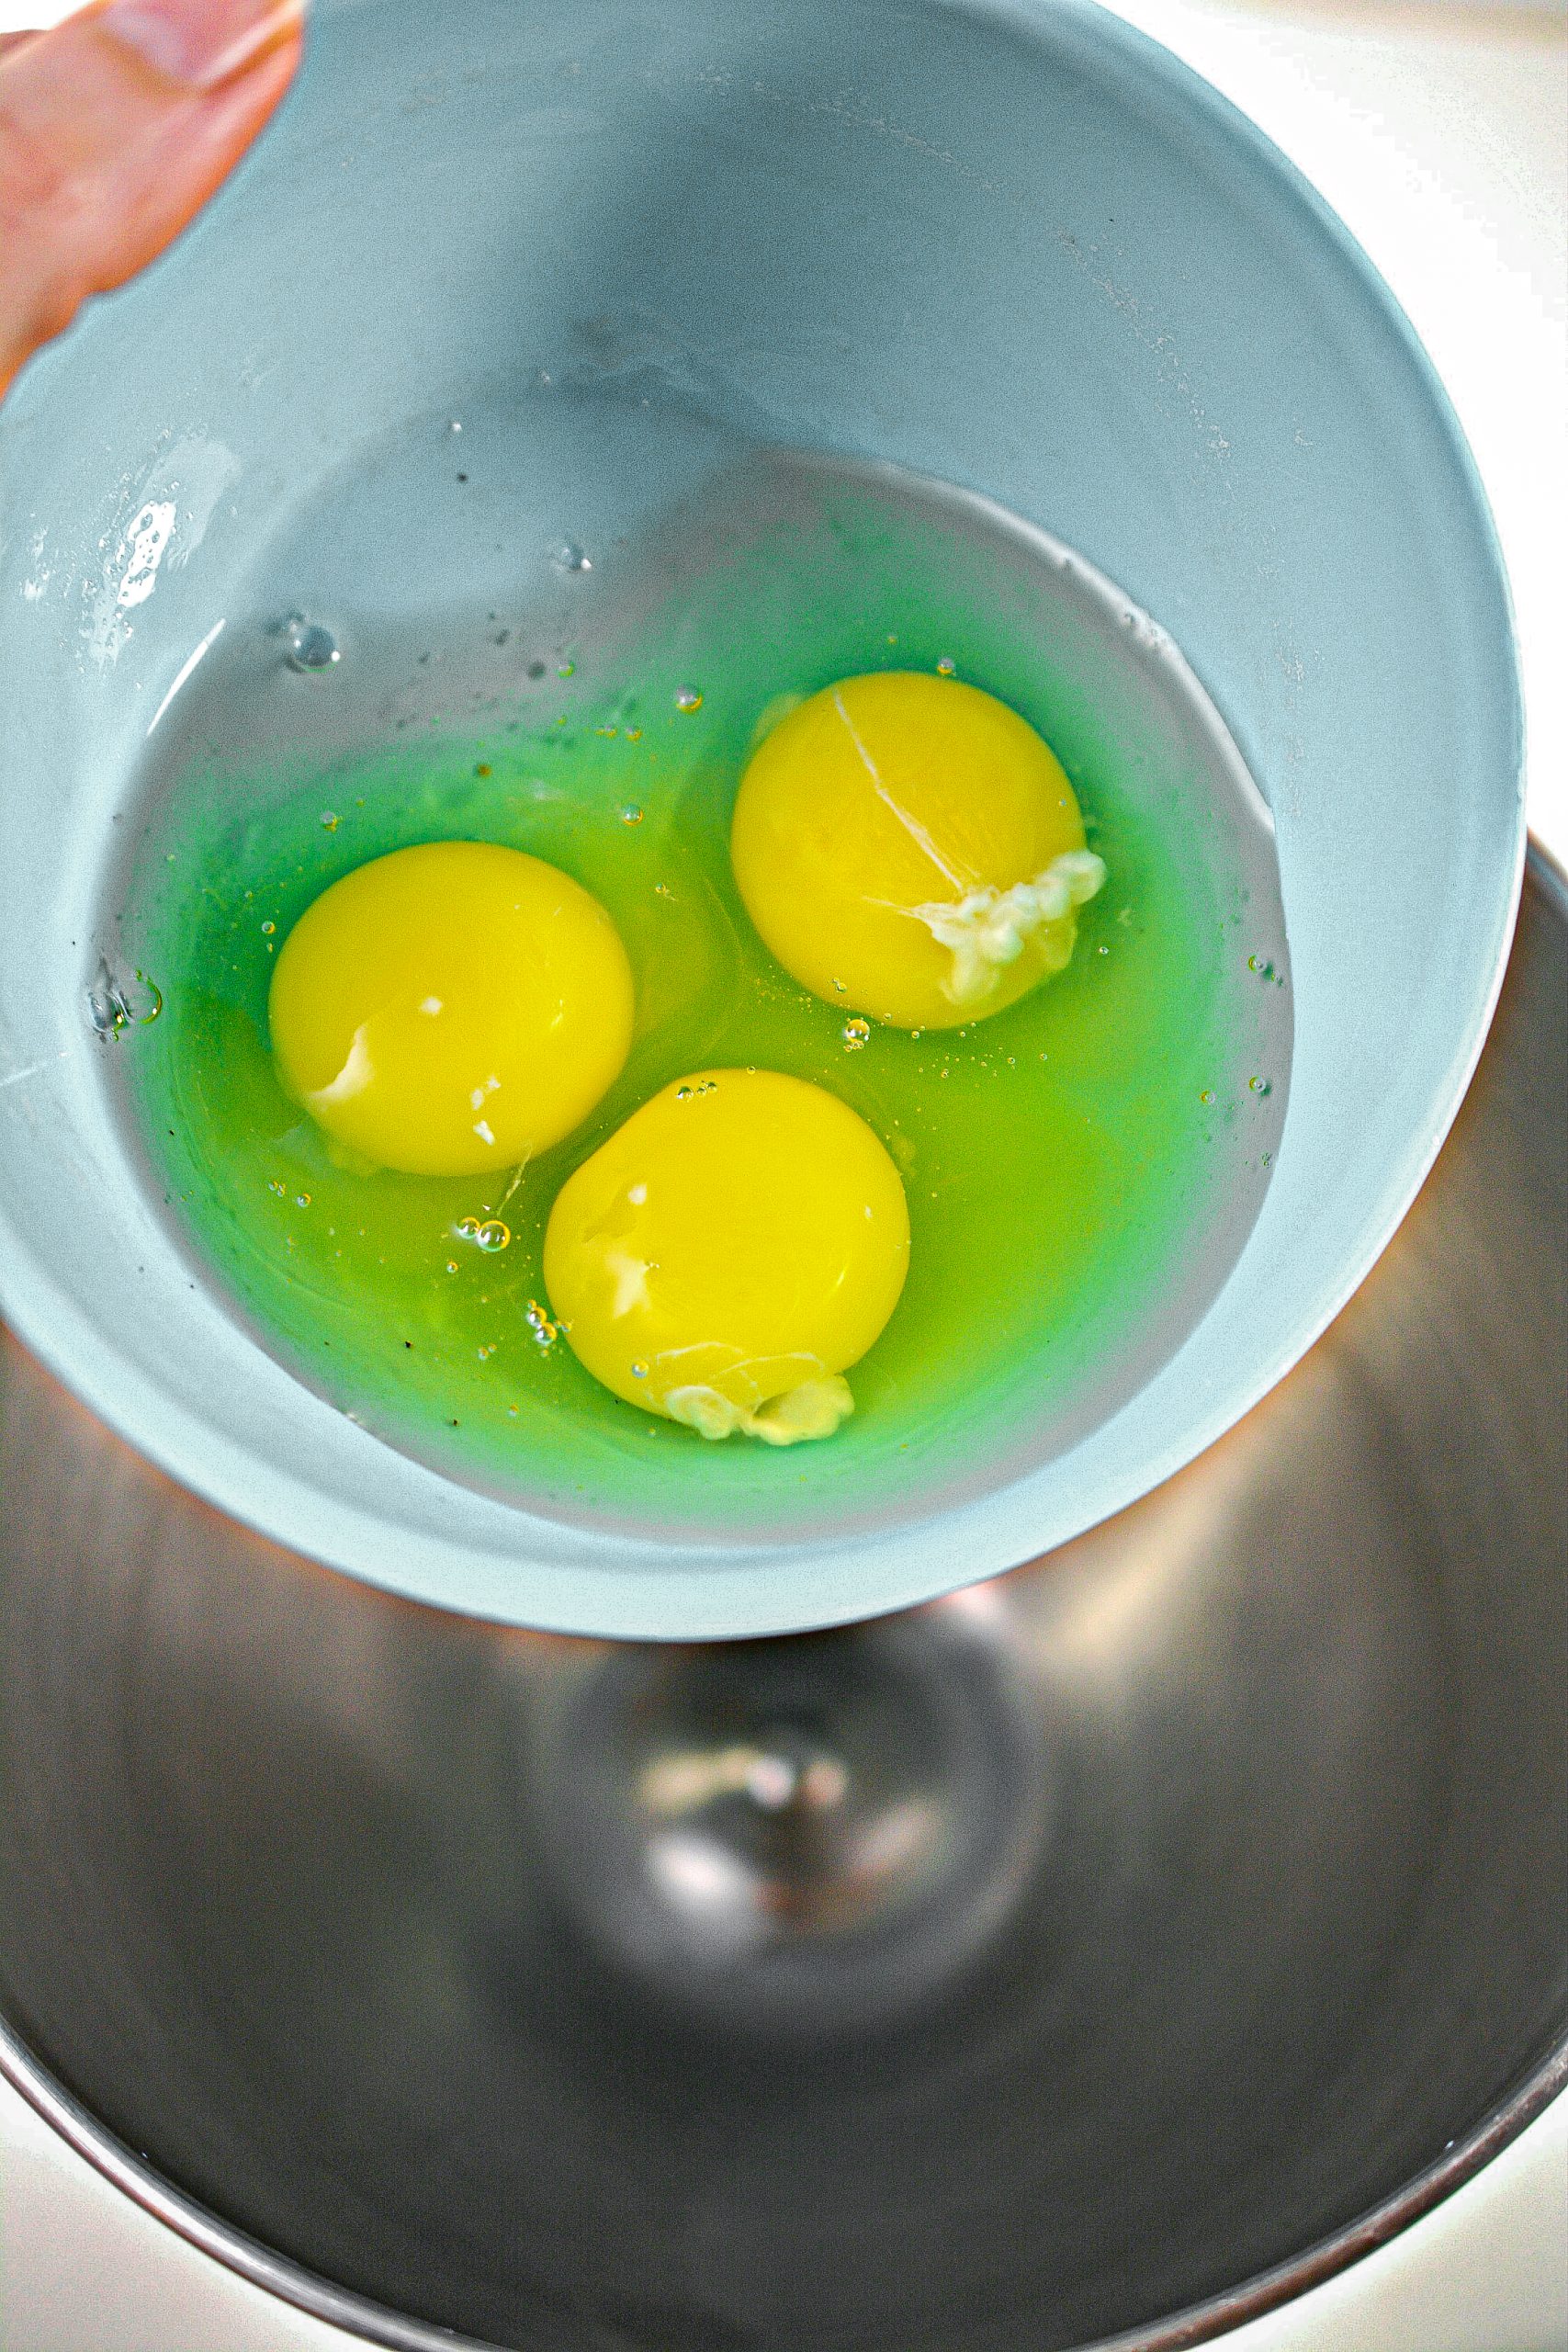 In a mixing bowl, blend the eggs, egg whites and Greek yogurt until frothy.